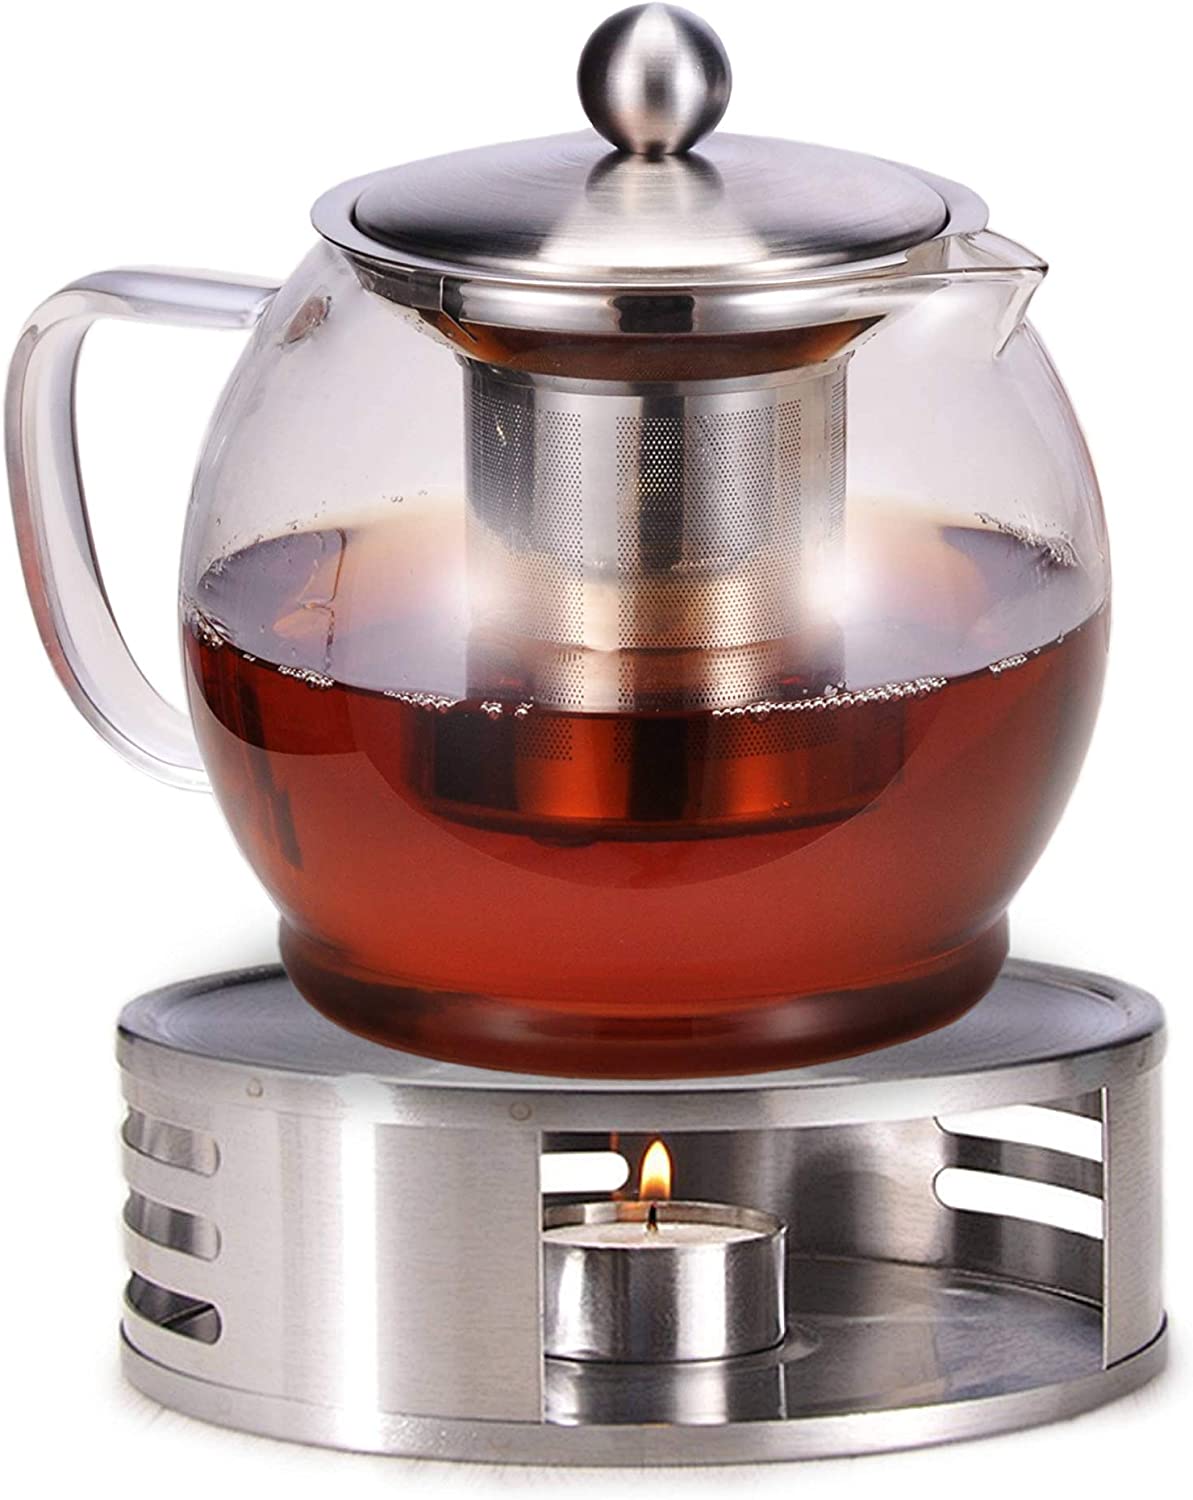 Gravidus Glass teapot with warmer and strainer insert, 1.2 litres, tea set, tea warmer and tea maker, coffee pot, glass jug for tea and coffee with lid